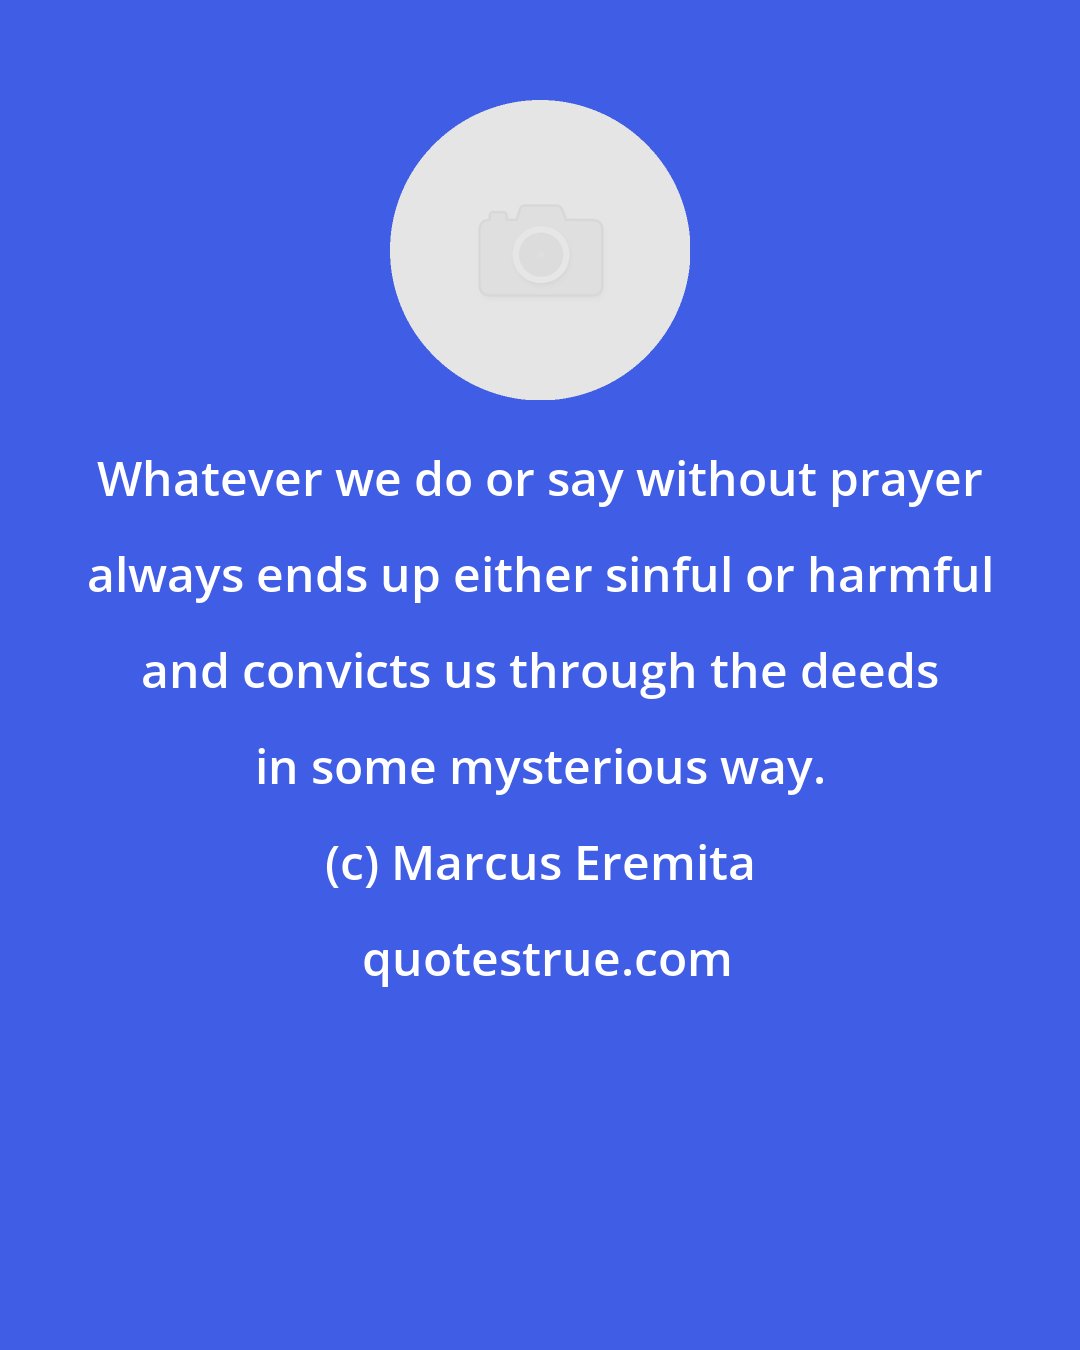 Marcus Eremita: Whatever we do or say without prayer always ends up either sinful or harmful and convicts us through the deeds in some mysterious way.